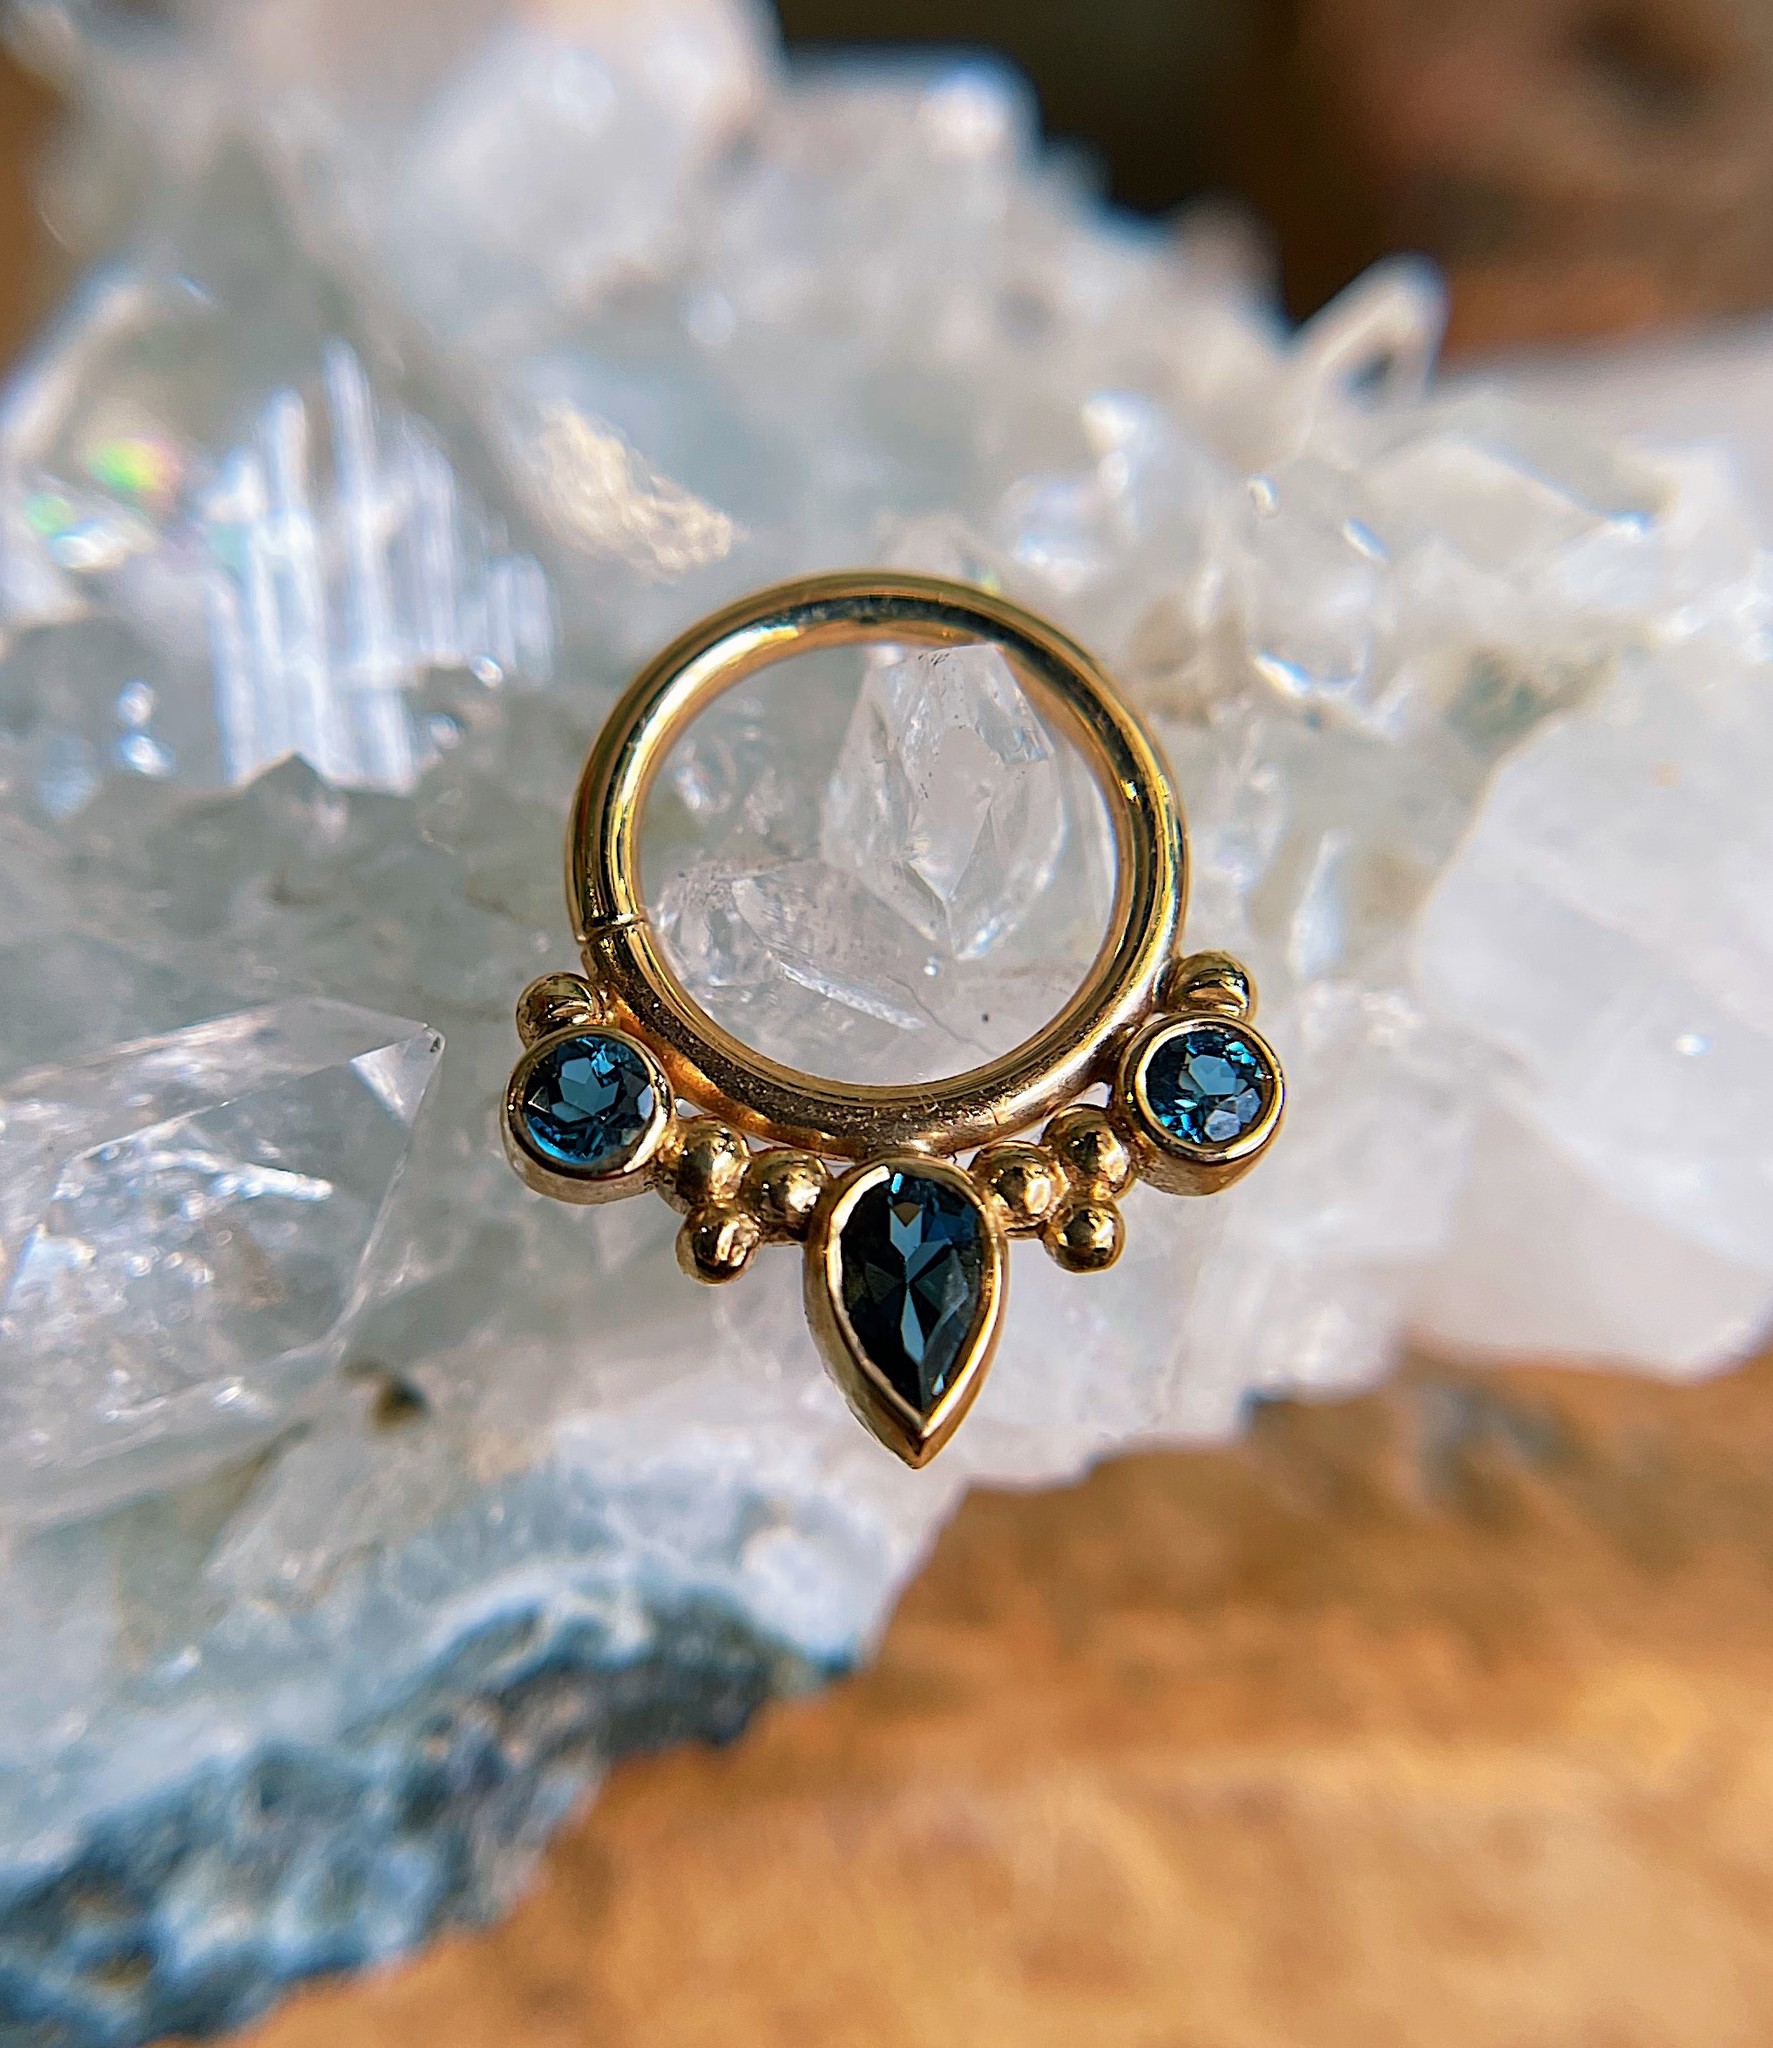 16g 5/16 "Eden Pear" with London Blue Topaz by BVLA